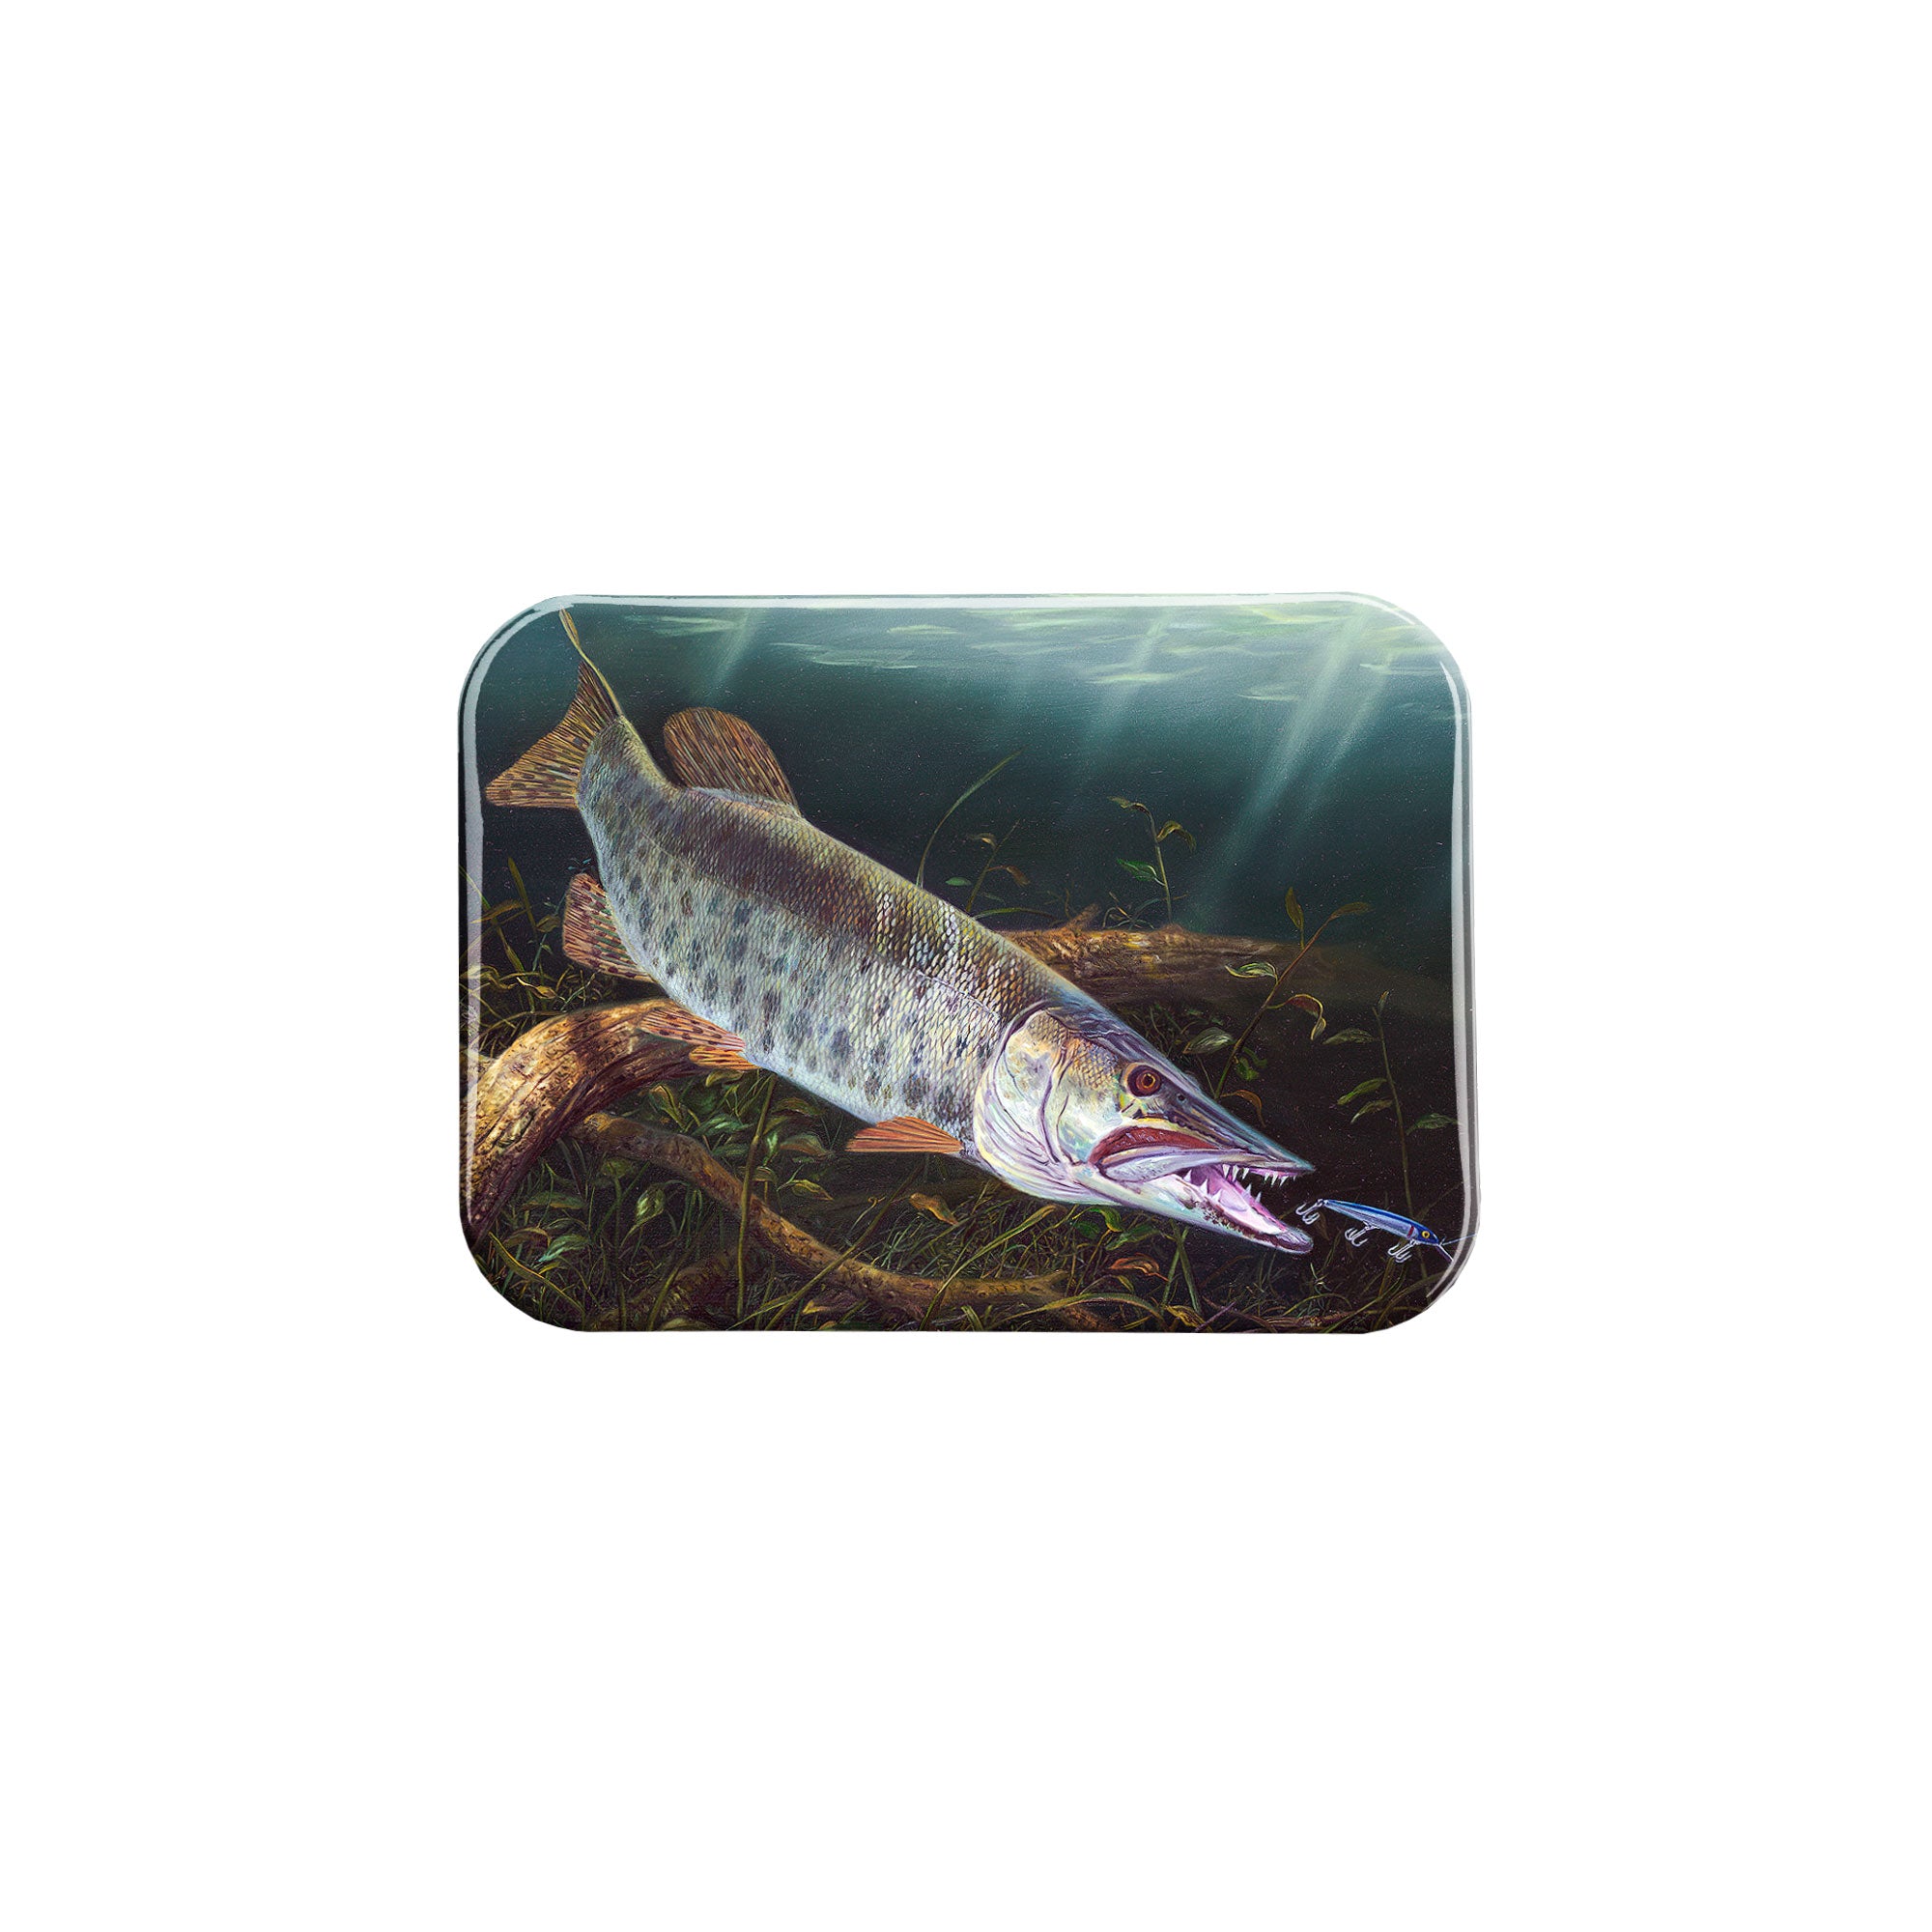 "A Muskie Lunging" - 2.5" X 3.5" Rectangle Fridge Magnets